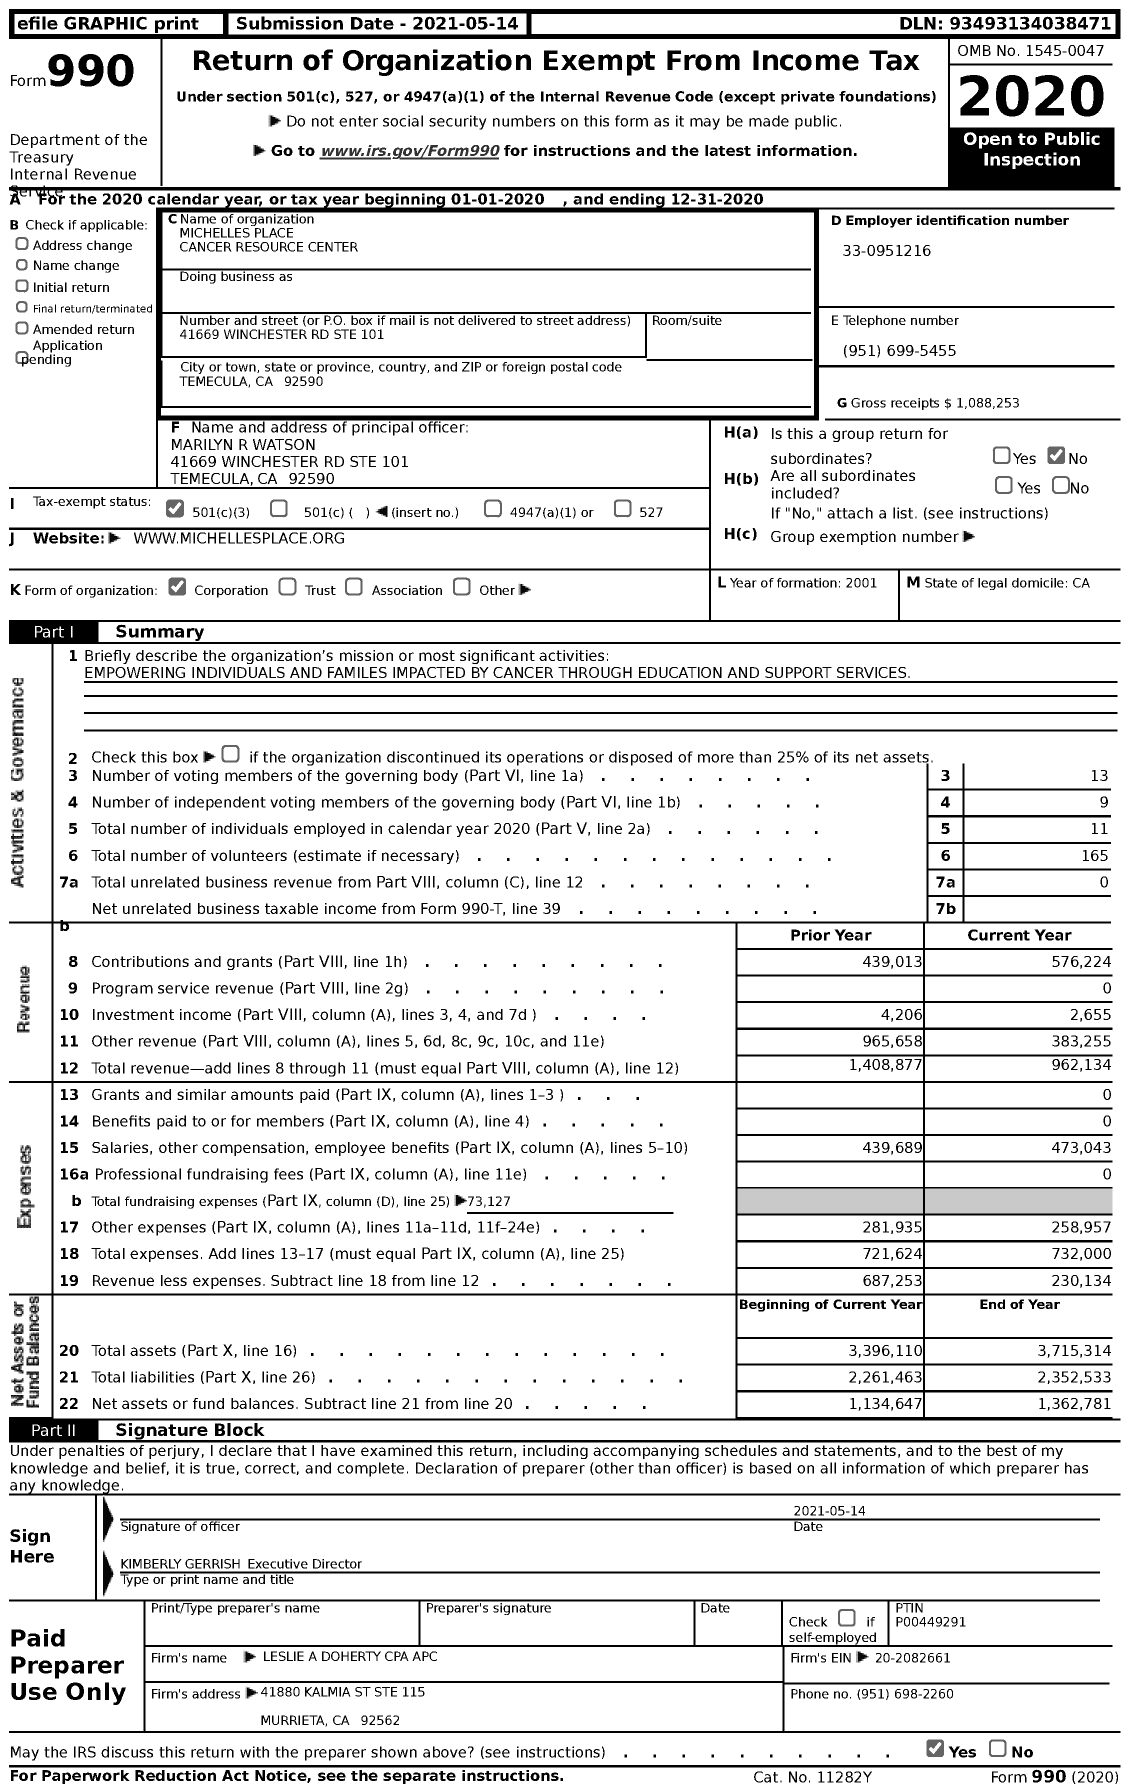 Image of first page of 2020 Form 990 for Michelles Place Cancer Resource Center